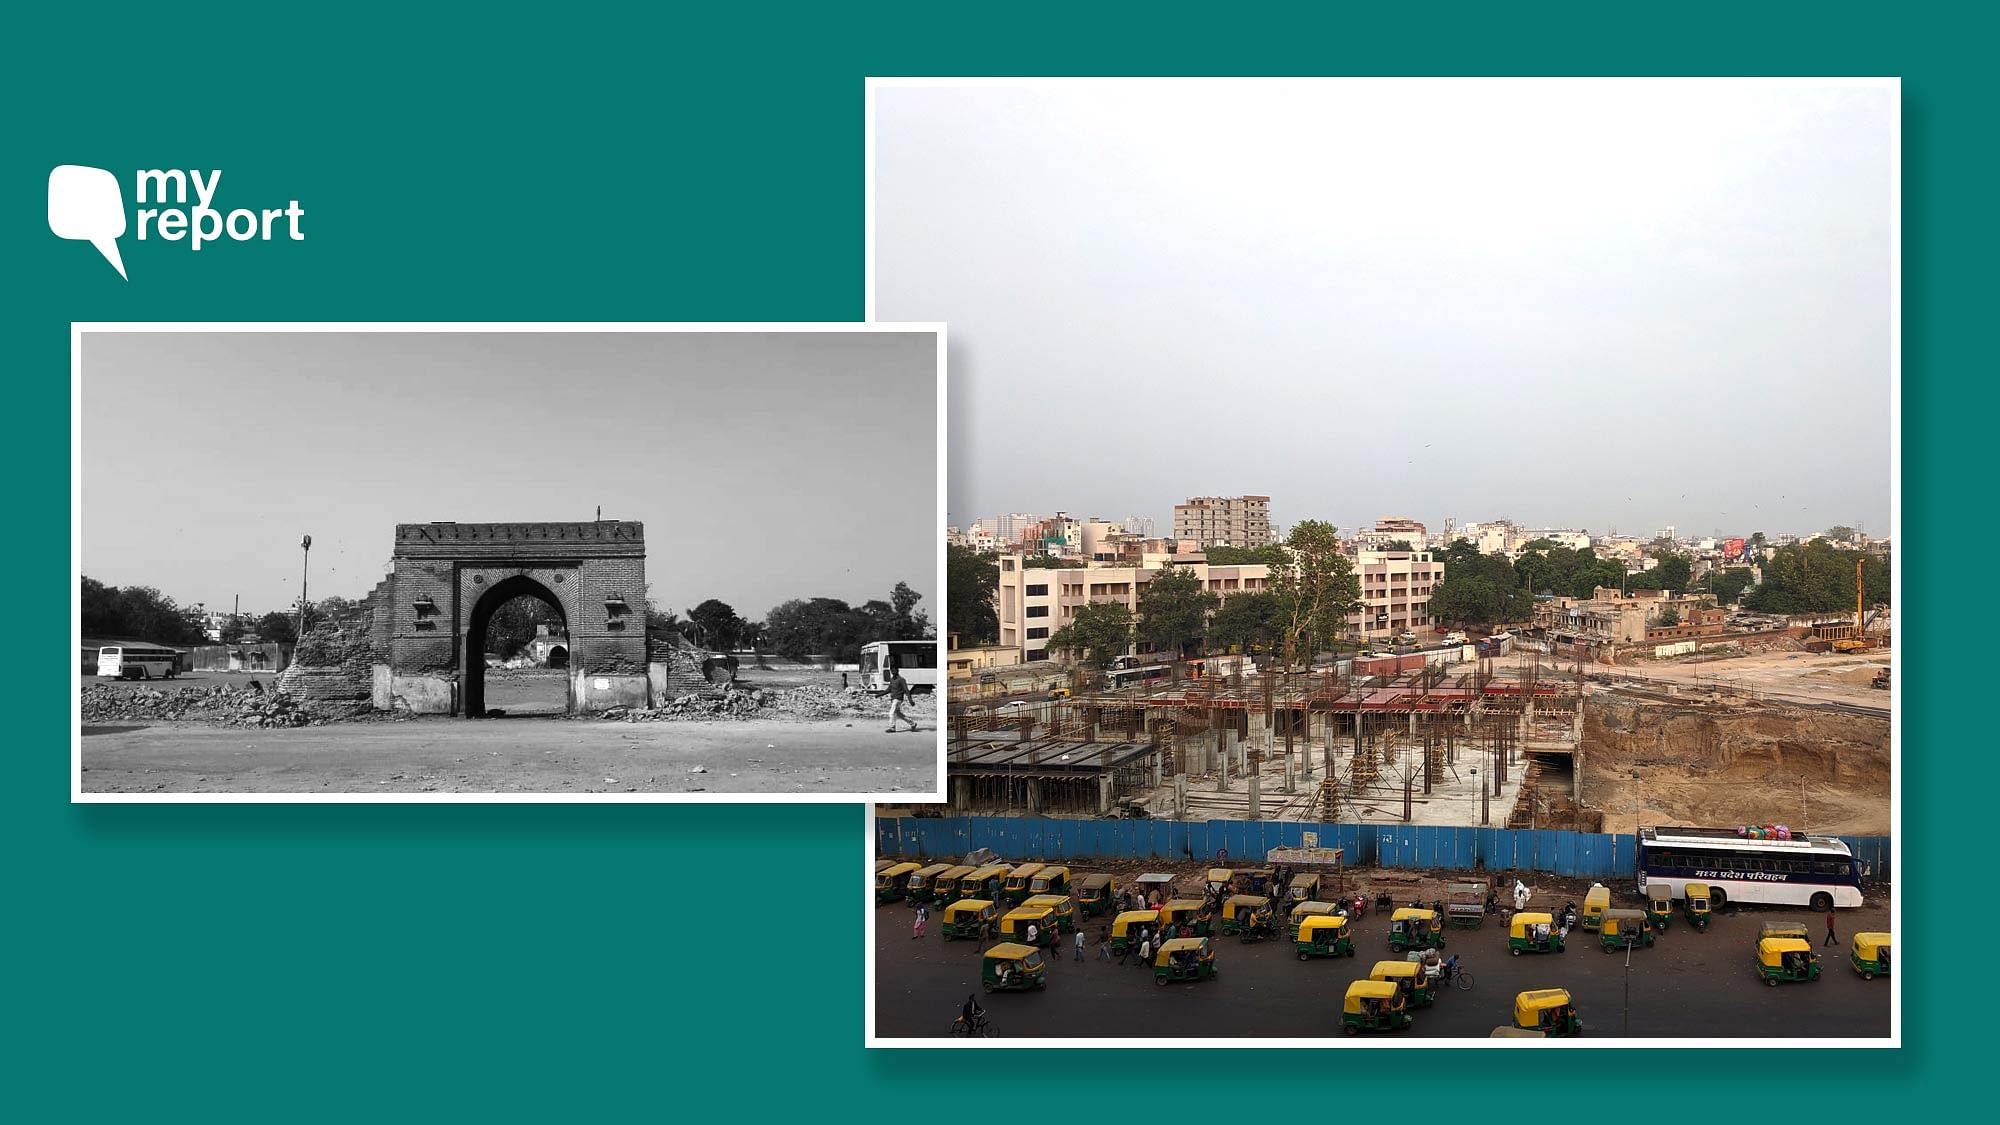 A historical gate was razed in Ahmedabad for the construction of a bus depot.